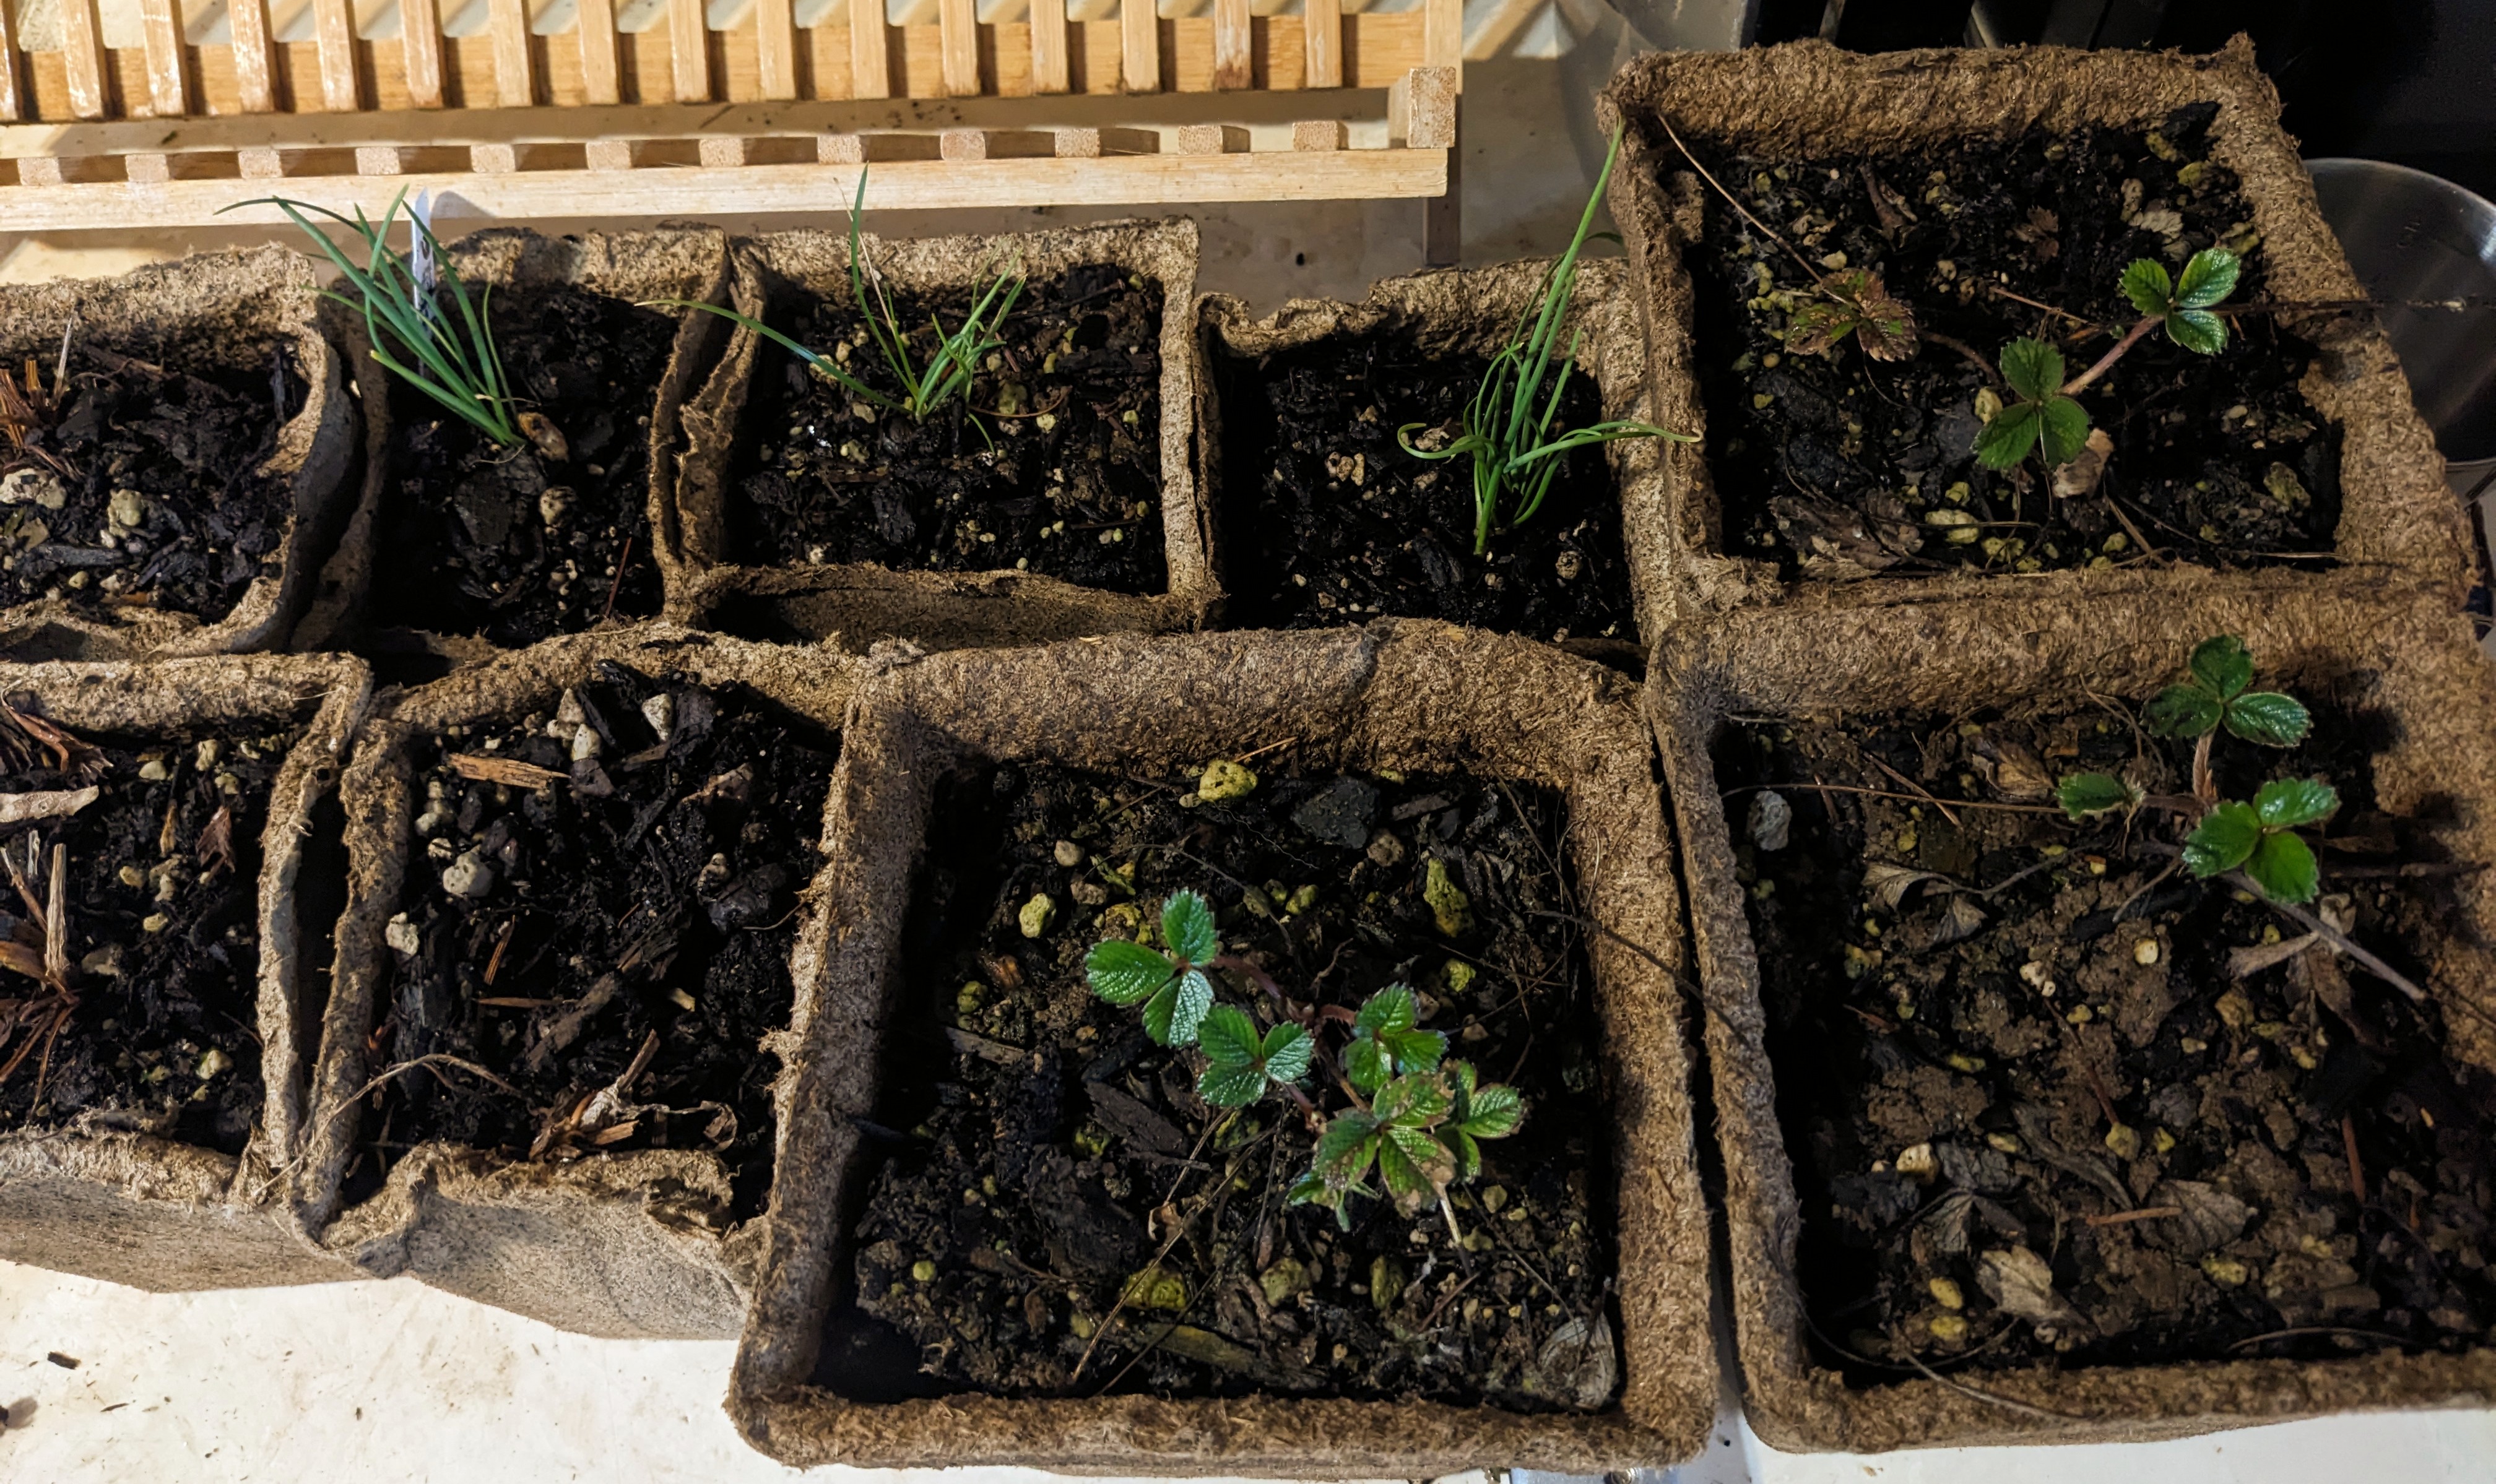 Biodegradable pots with coastal strawberries, nodding onions, and silverweeds sprouting out of the dirt.